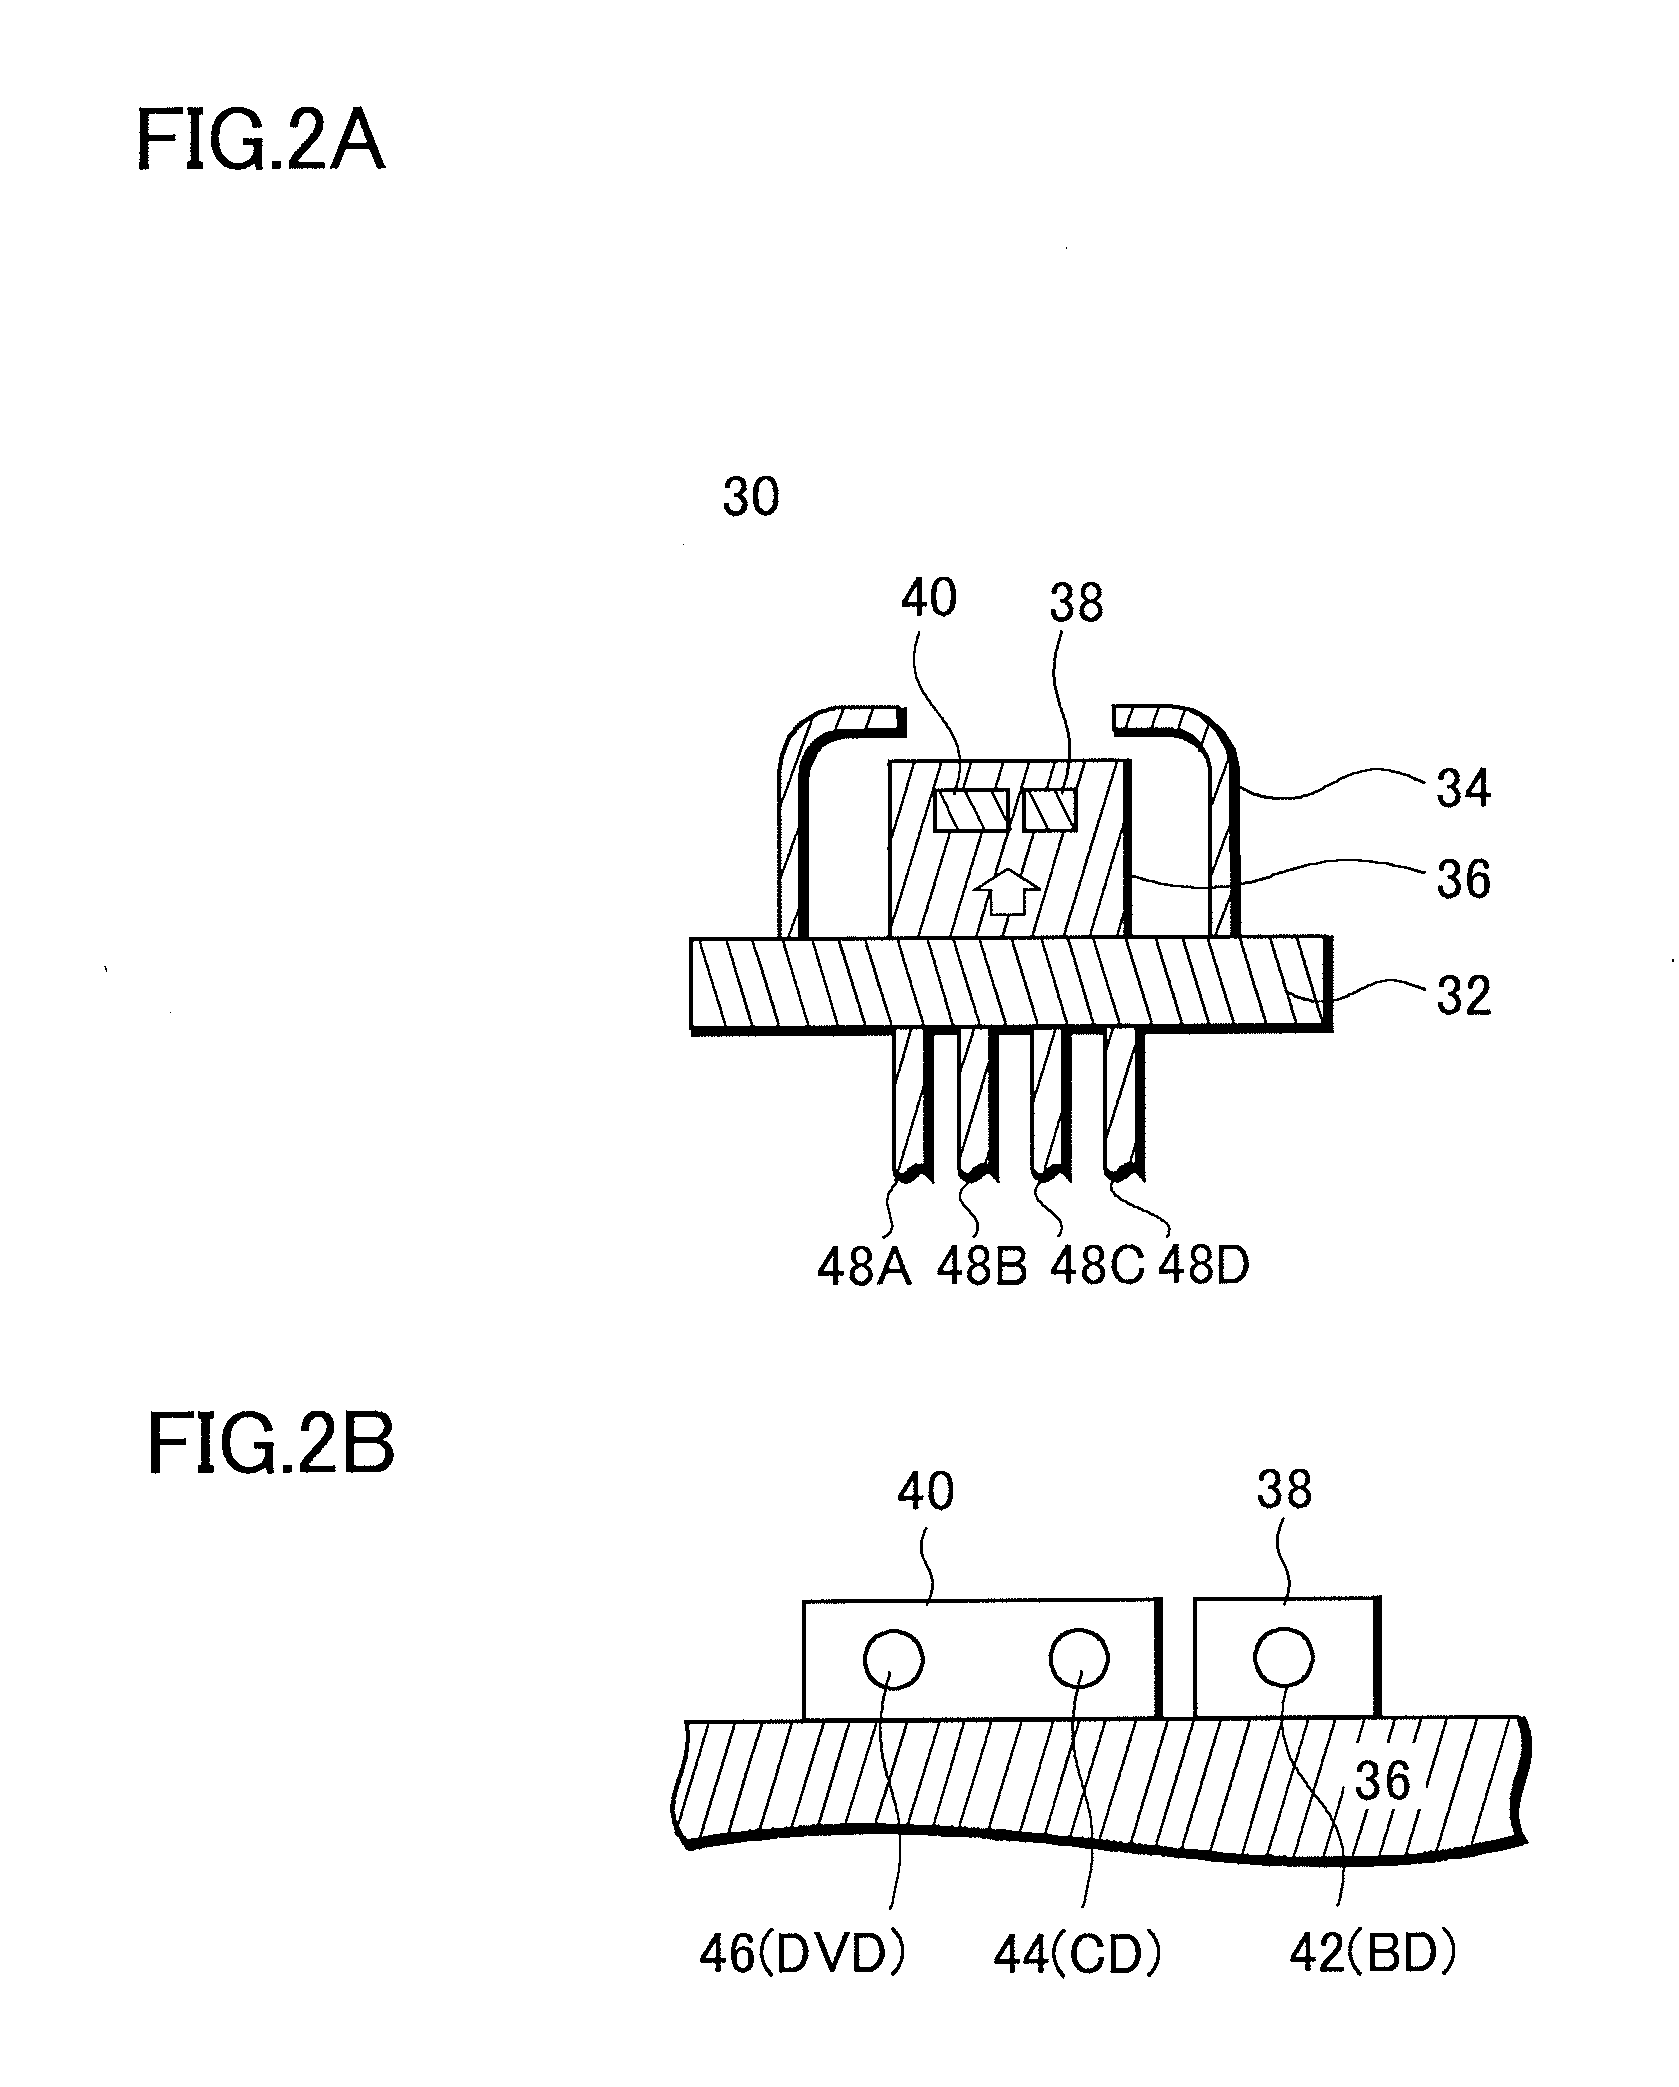 Optical pickup device, optical disk device, and manufacturing method for the same